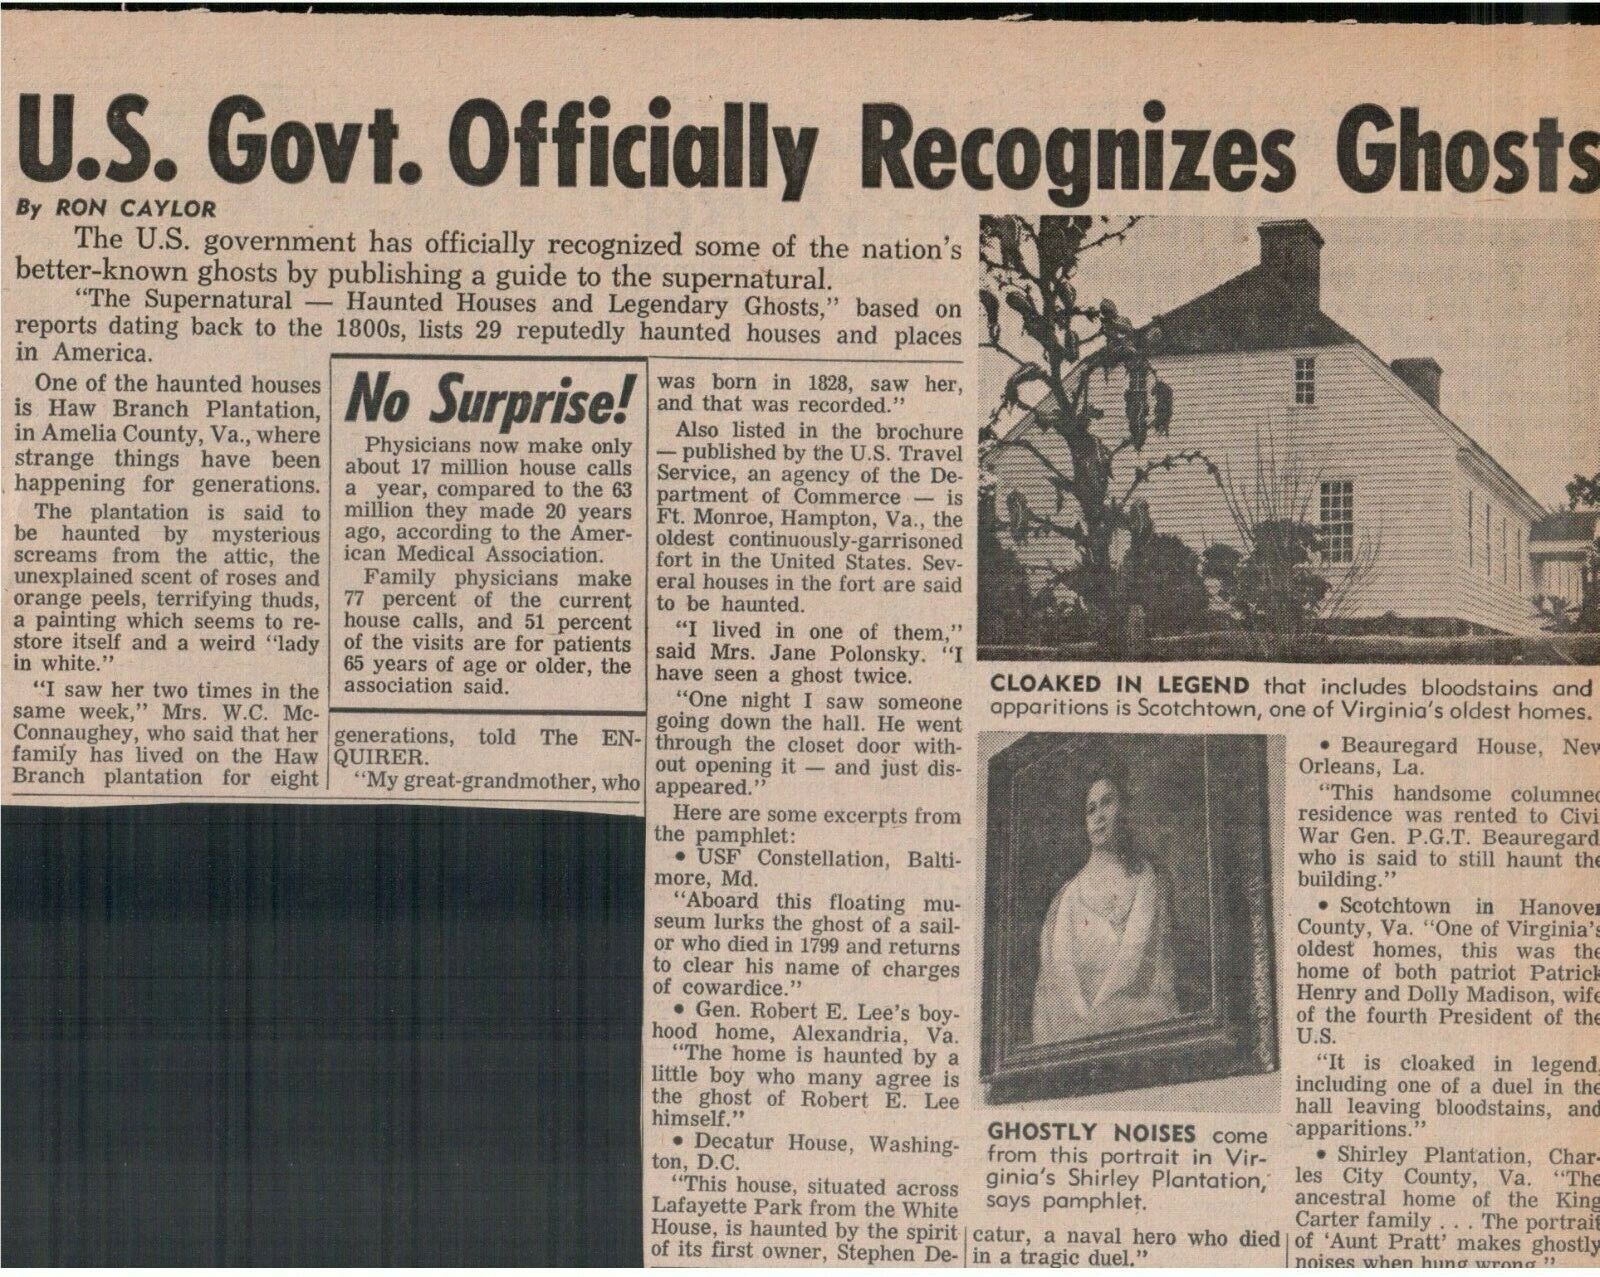 1970's  “U.S. Government Officially Recognizes Ghosts” National Enquirer article